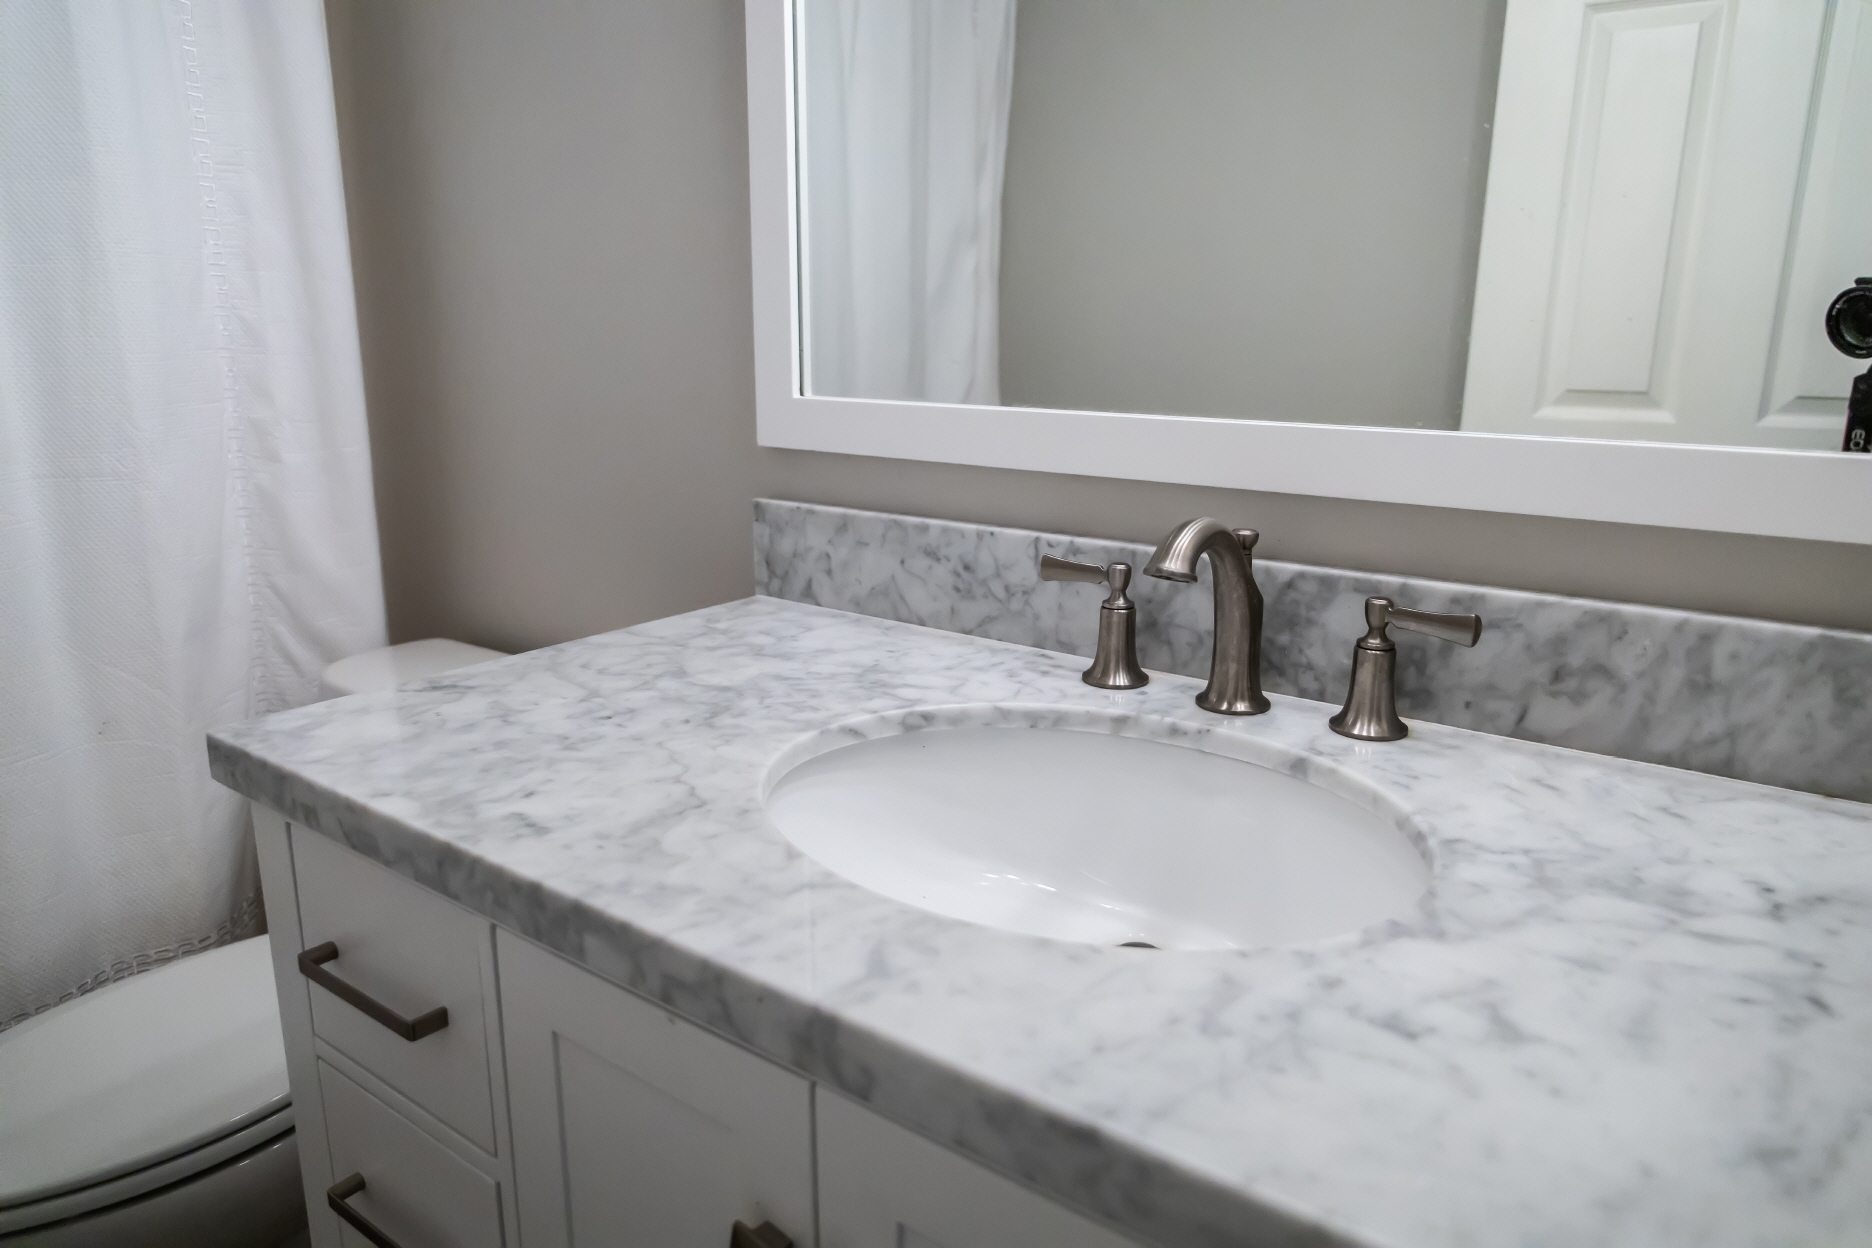 Marble vanity tops add timeless luxury to bathrooms, staying stylish for years.